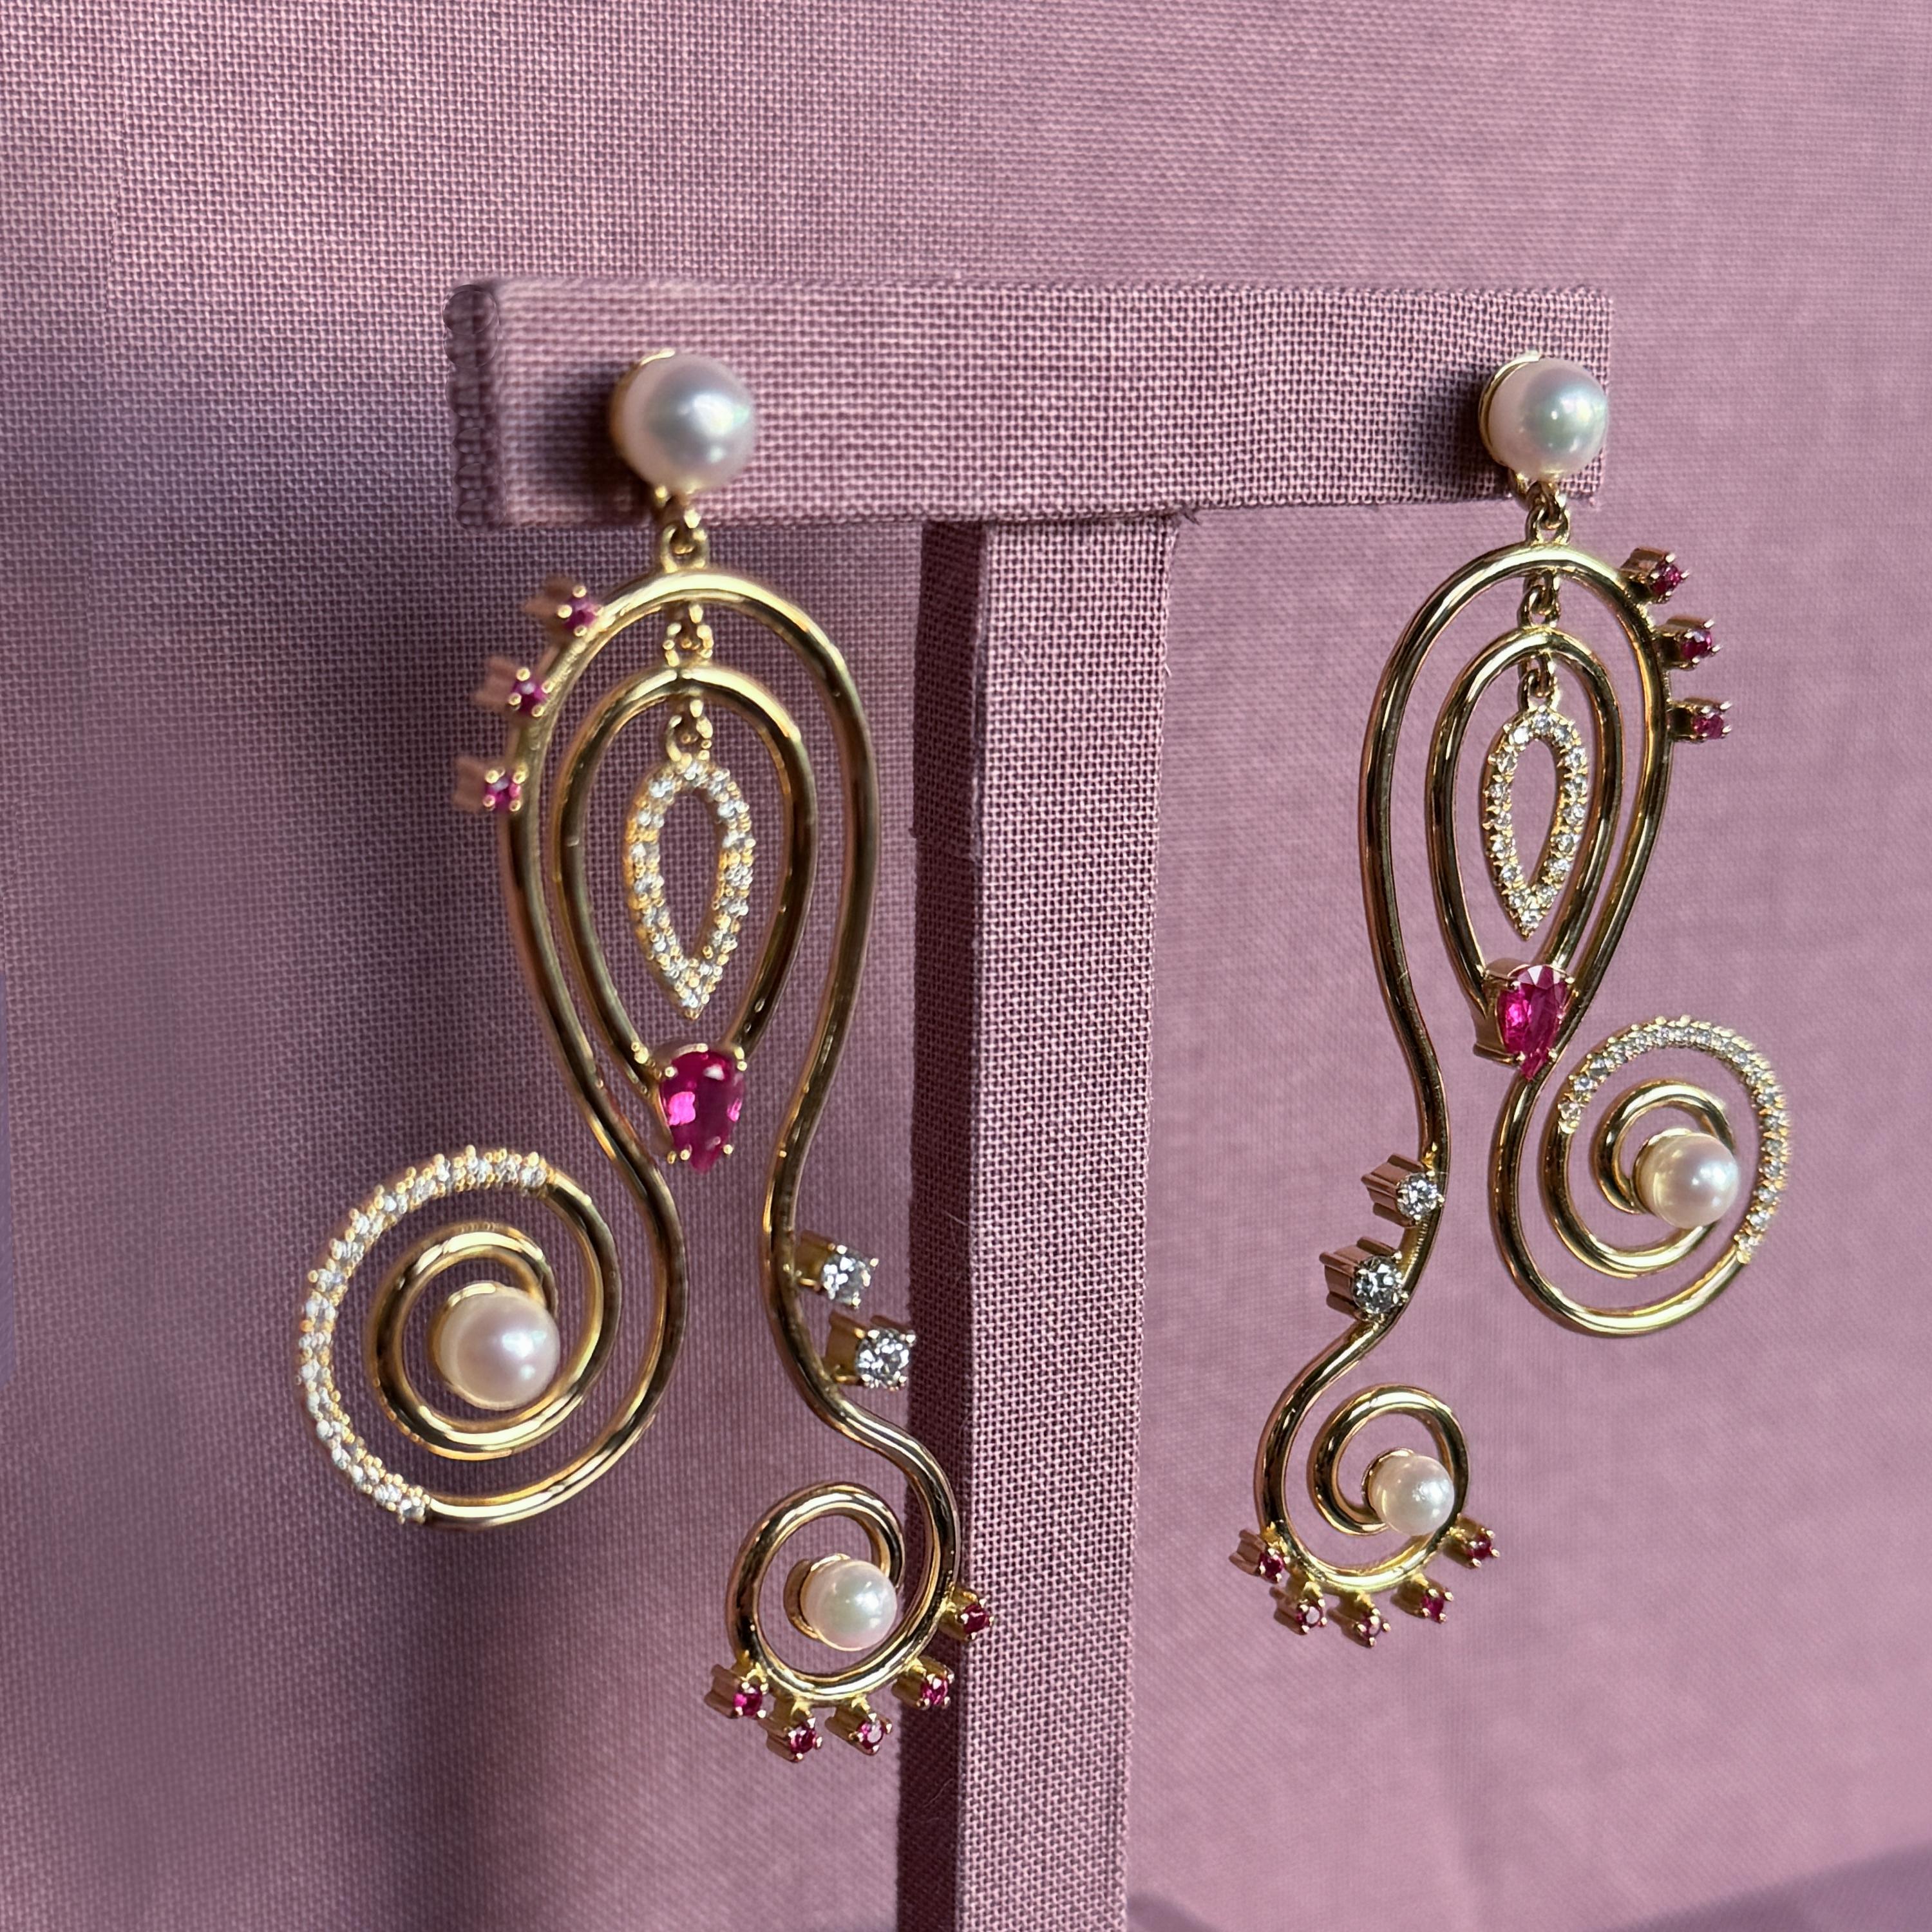 Contemporary Serenity Earrings in 18 Karat Yellow Gold with Diamonds, Rubies And Pearls